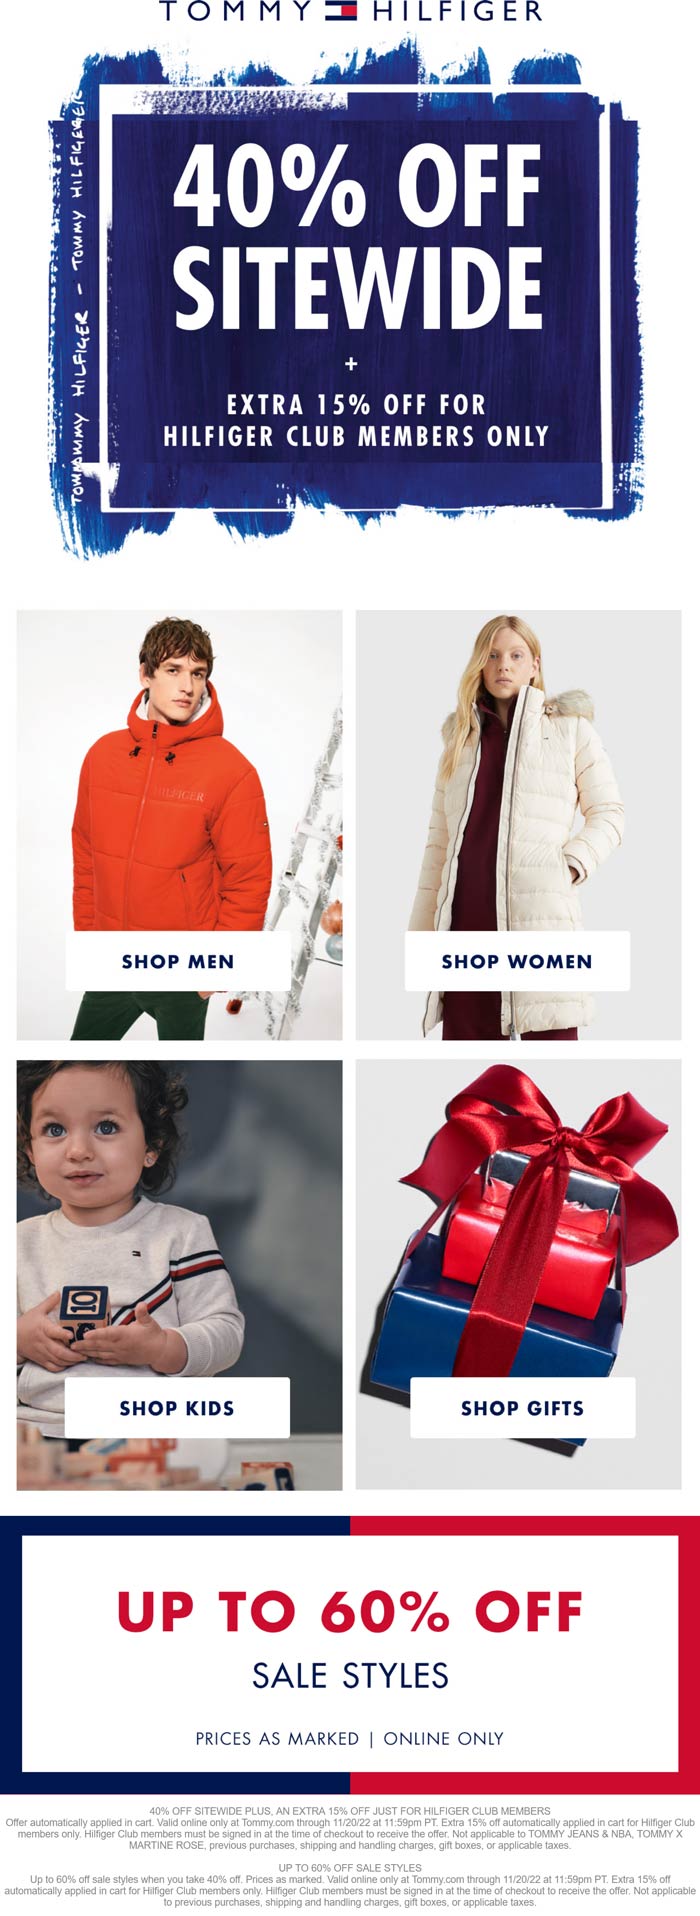 Tommy Hilfiger stores Coupon  40-55% off everything online today at Tommy Hilfiger #tommyhilfiger 